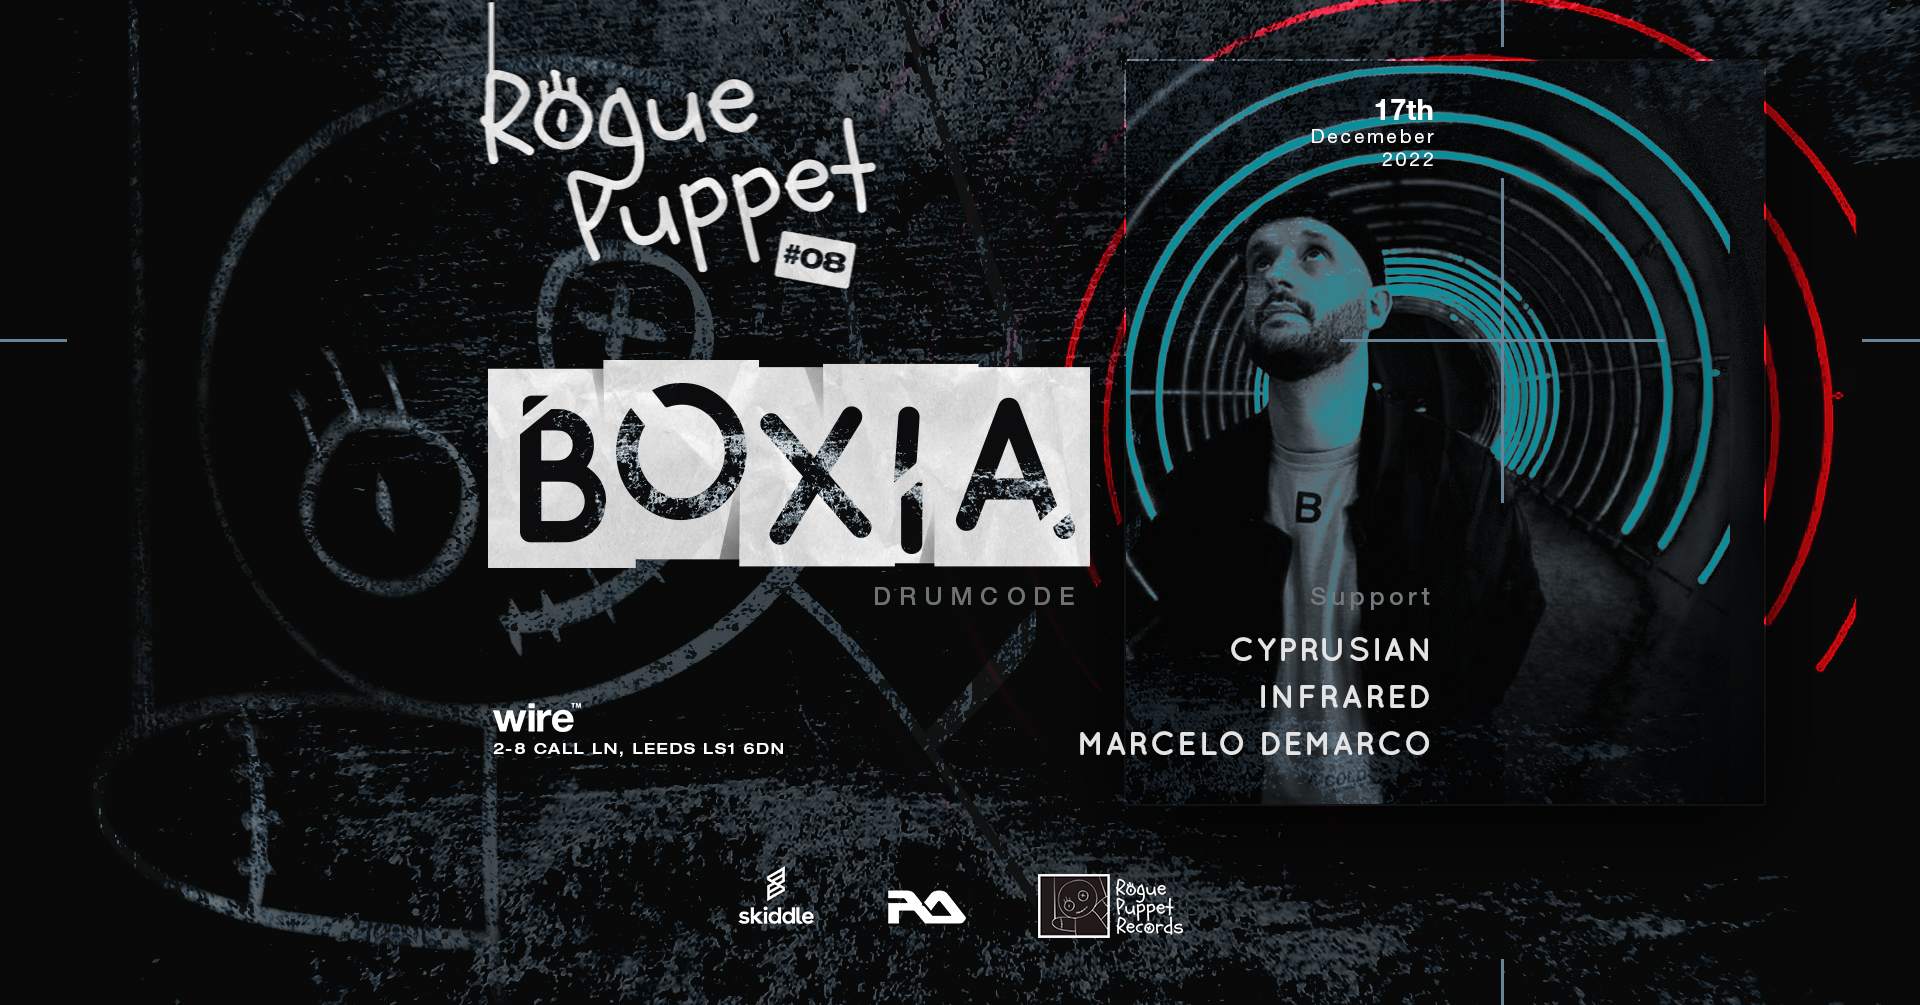 Rogue Puppet 08 - Techno with Boxia - Página frontal